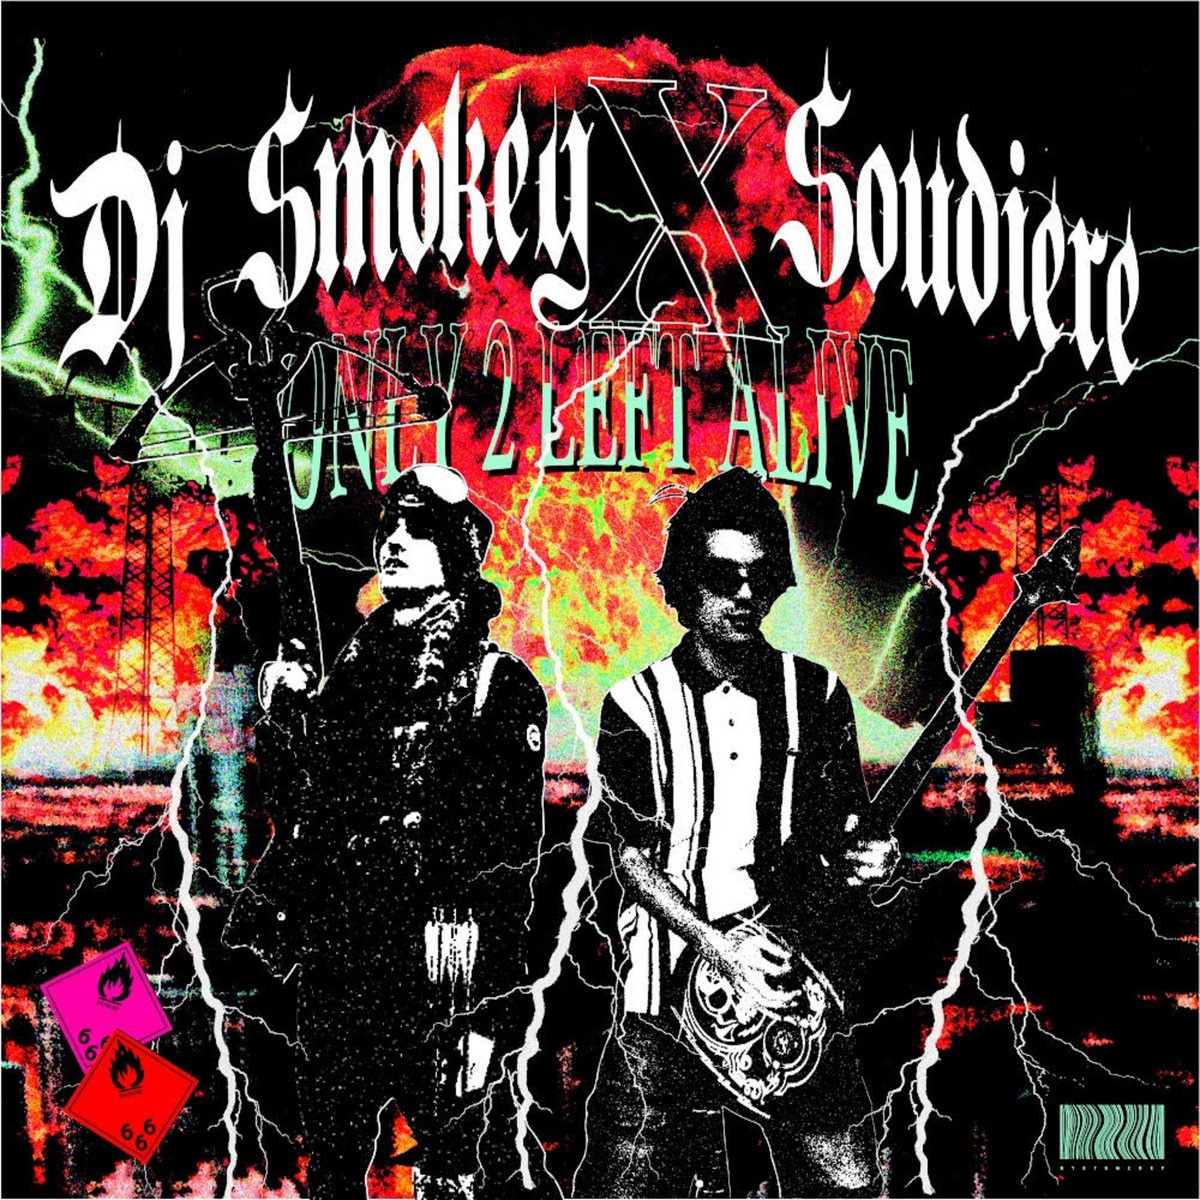 SOUDIERE & DJ SMOKEY link up for collaborative album "ONLY 2 LEFT ALIVE"